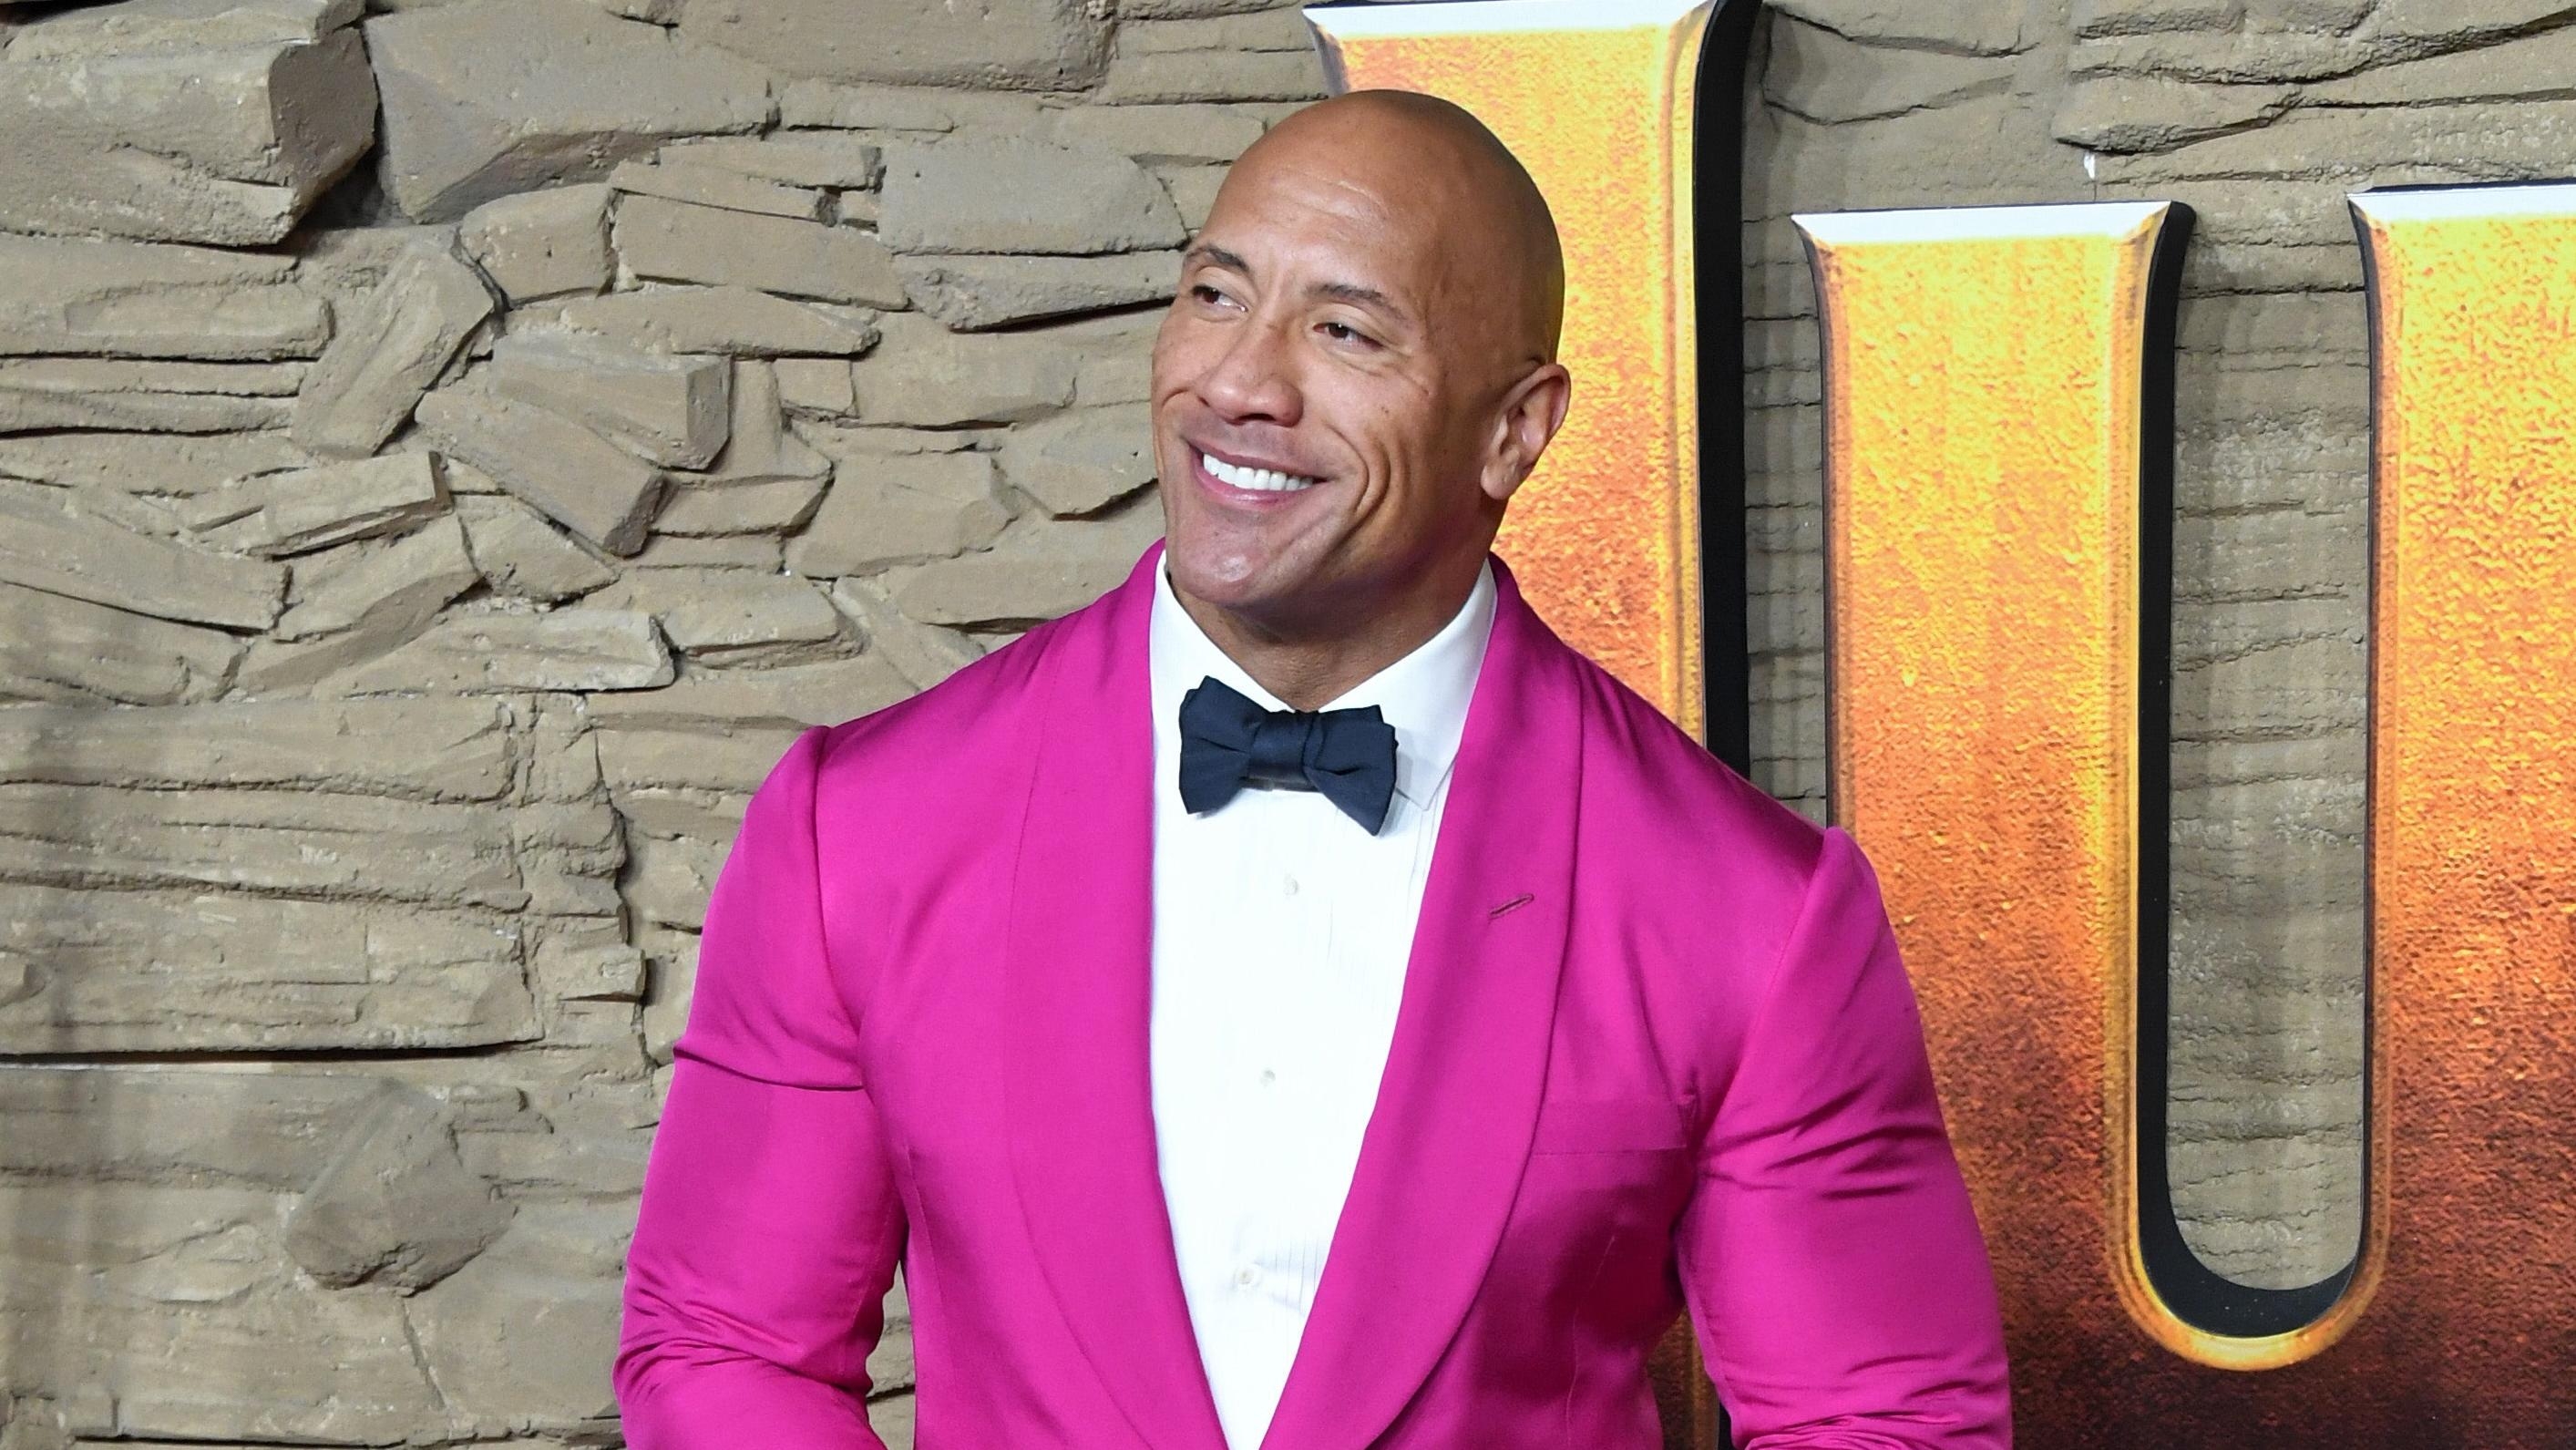 Dwayne Johnson to star in Red One for Amazon, not to be confused with his Red Notice on Netflix